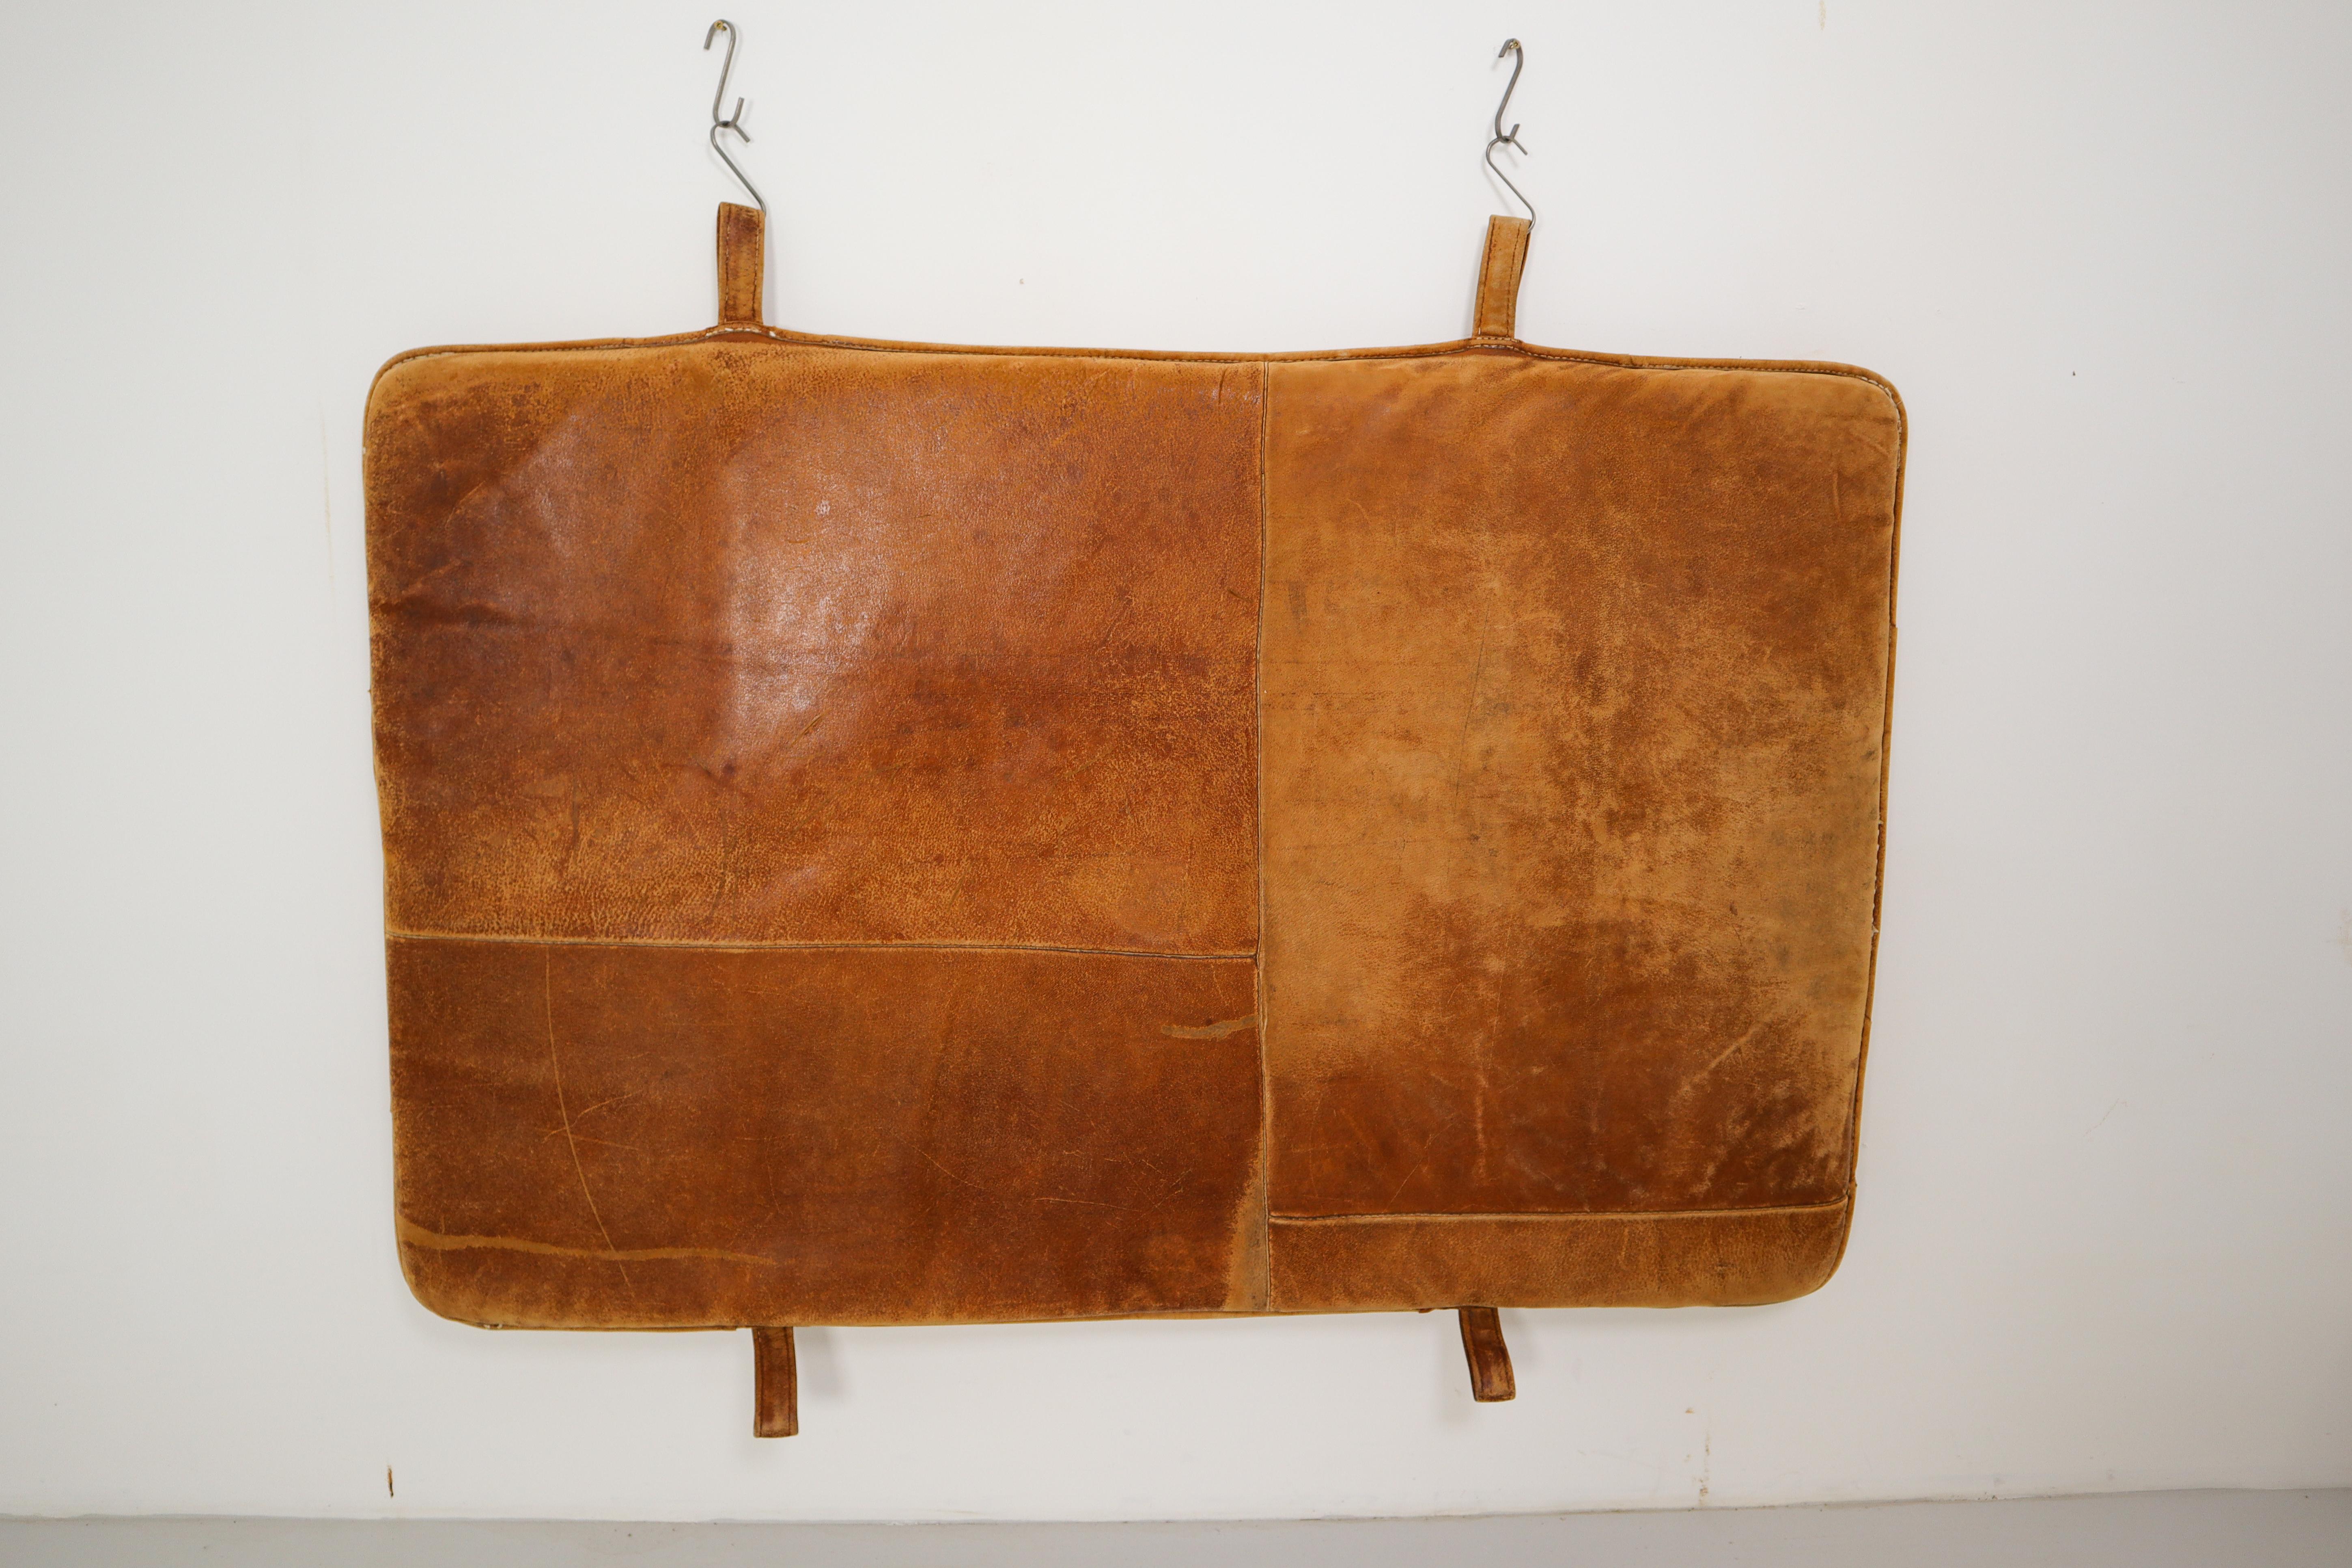 This cognac brown leather gym mat originally used in the gym, now ideal in the home as a bedhead, or a playmat. The gym mat is in a very good vintage condition with original patina. And is made in Czech Republic, 1940s.